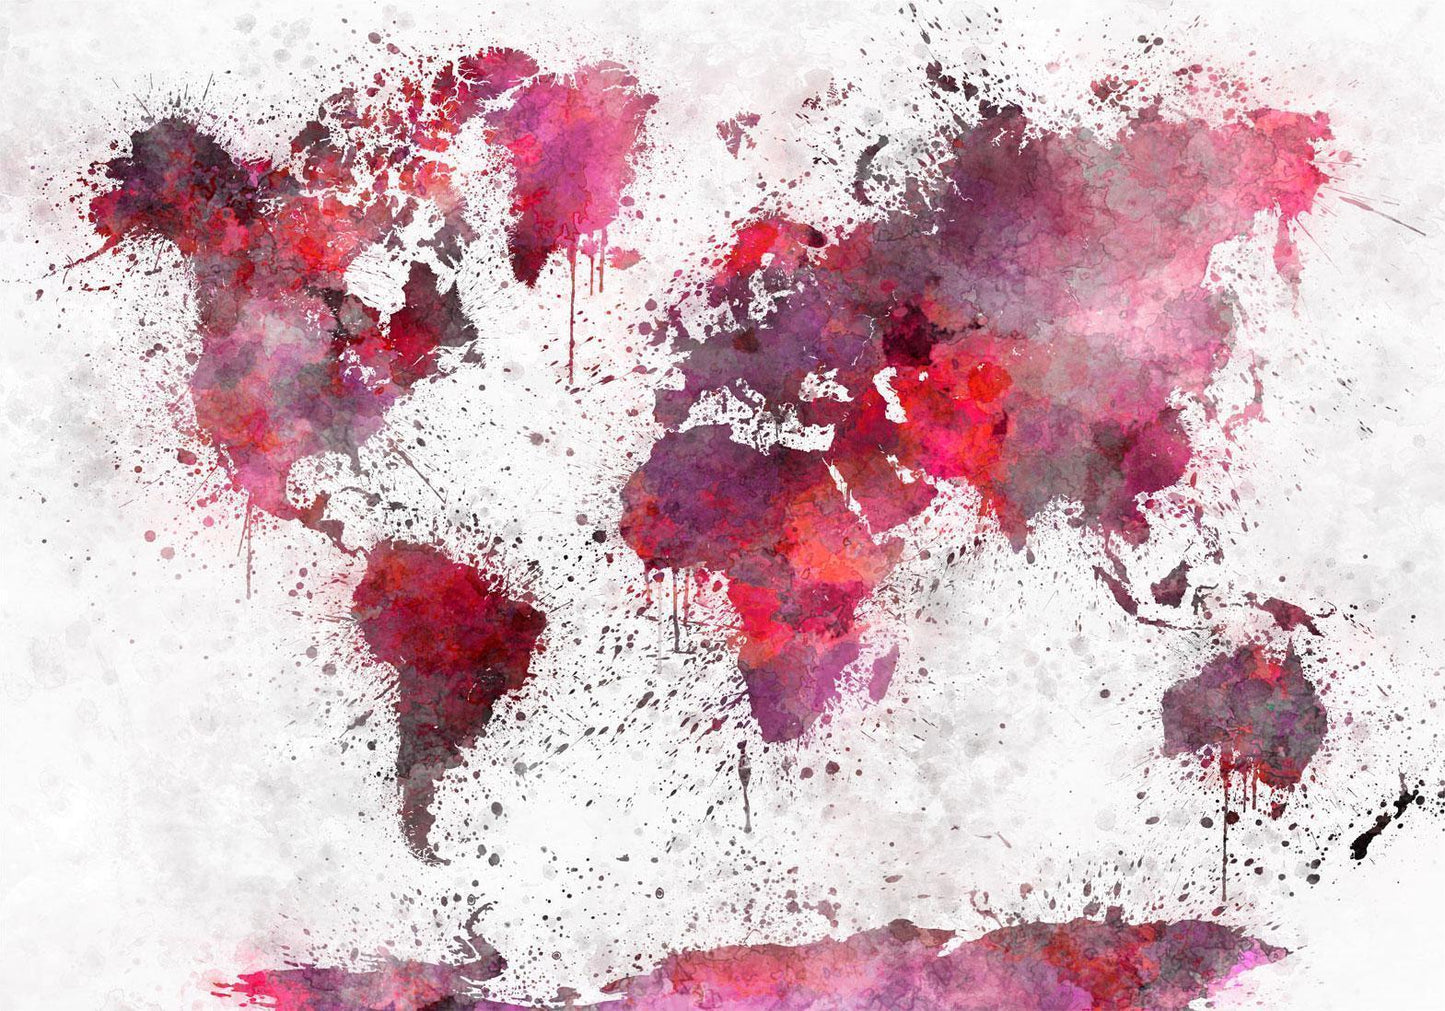 Wall Mural - World Map: Red Watercolors